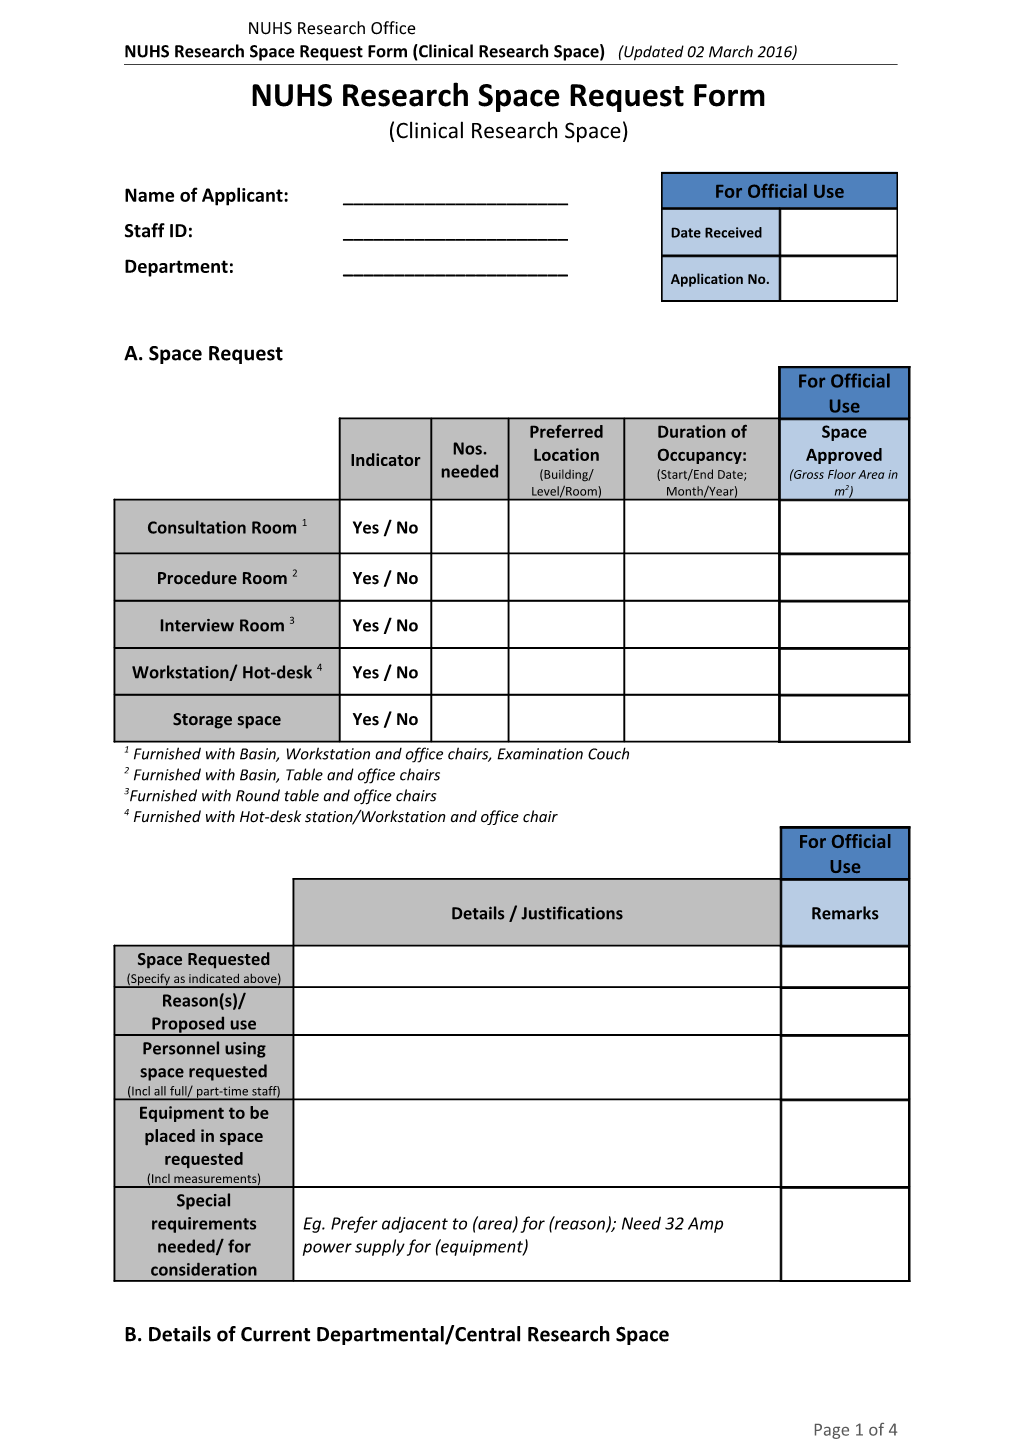 NUHS Research Space Request Form (Clinical Research Space) (Updated 02March 2016)